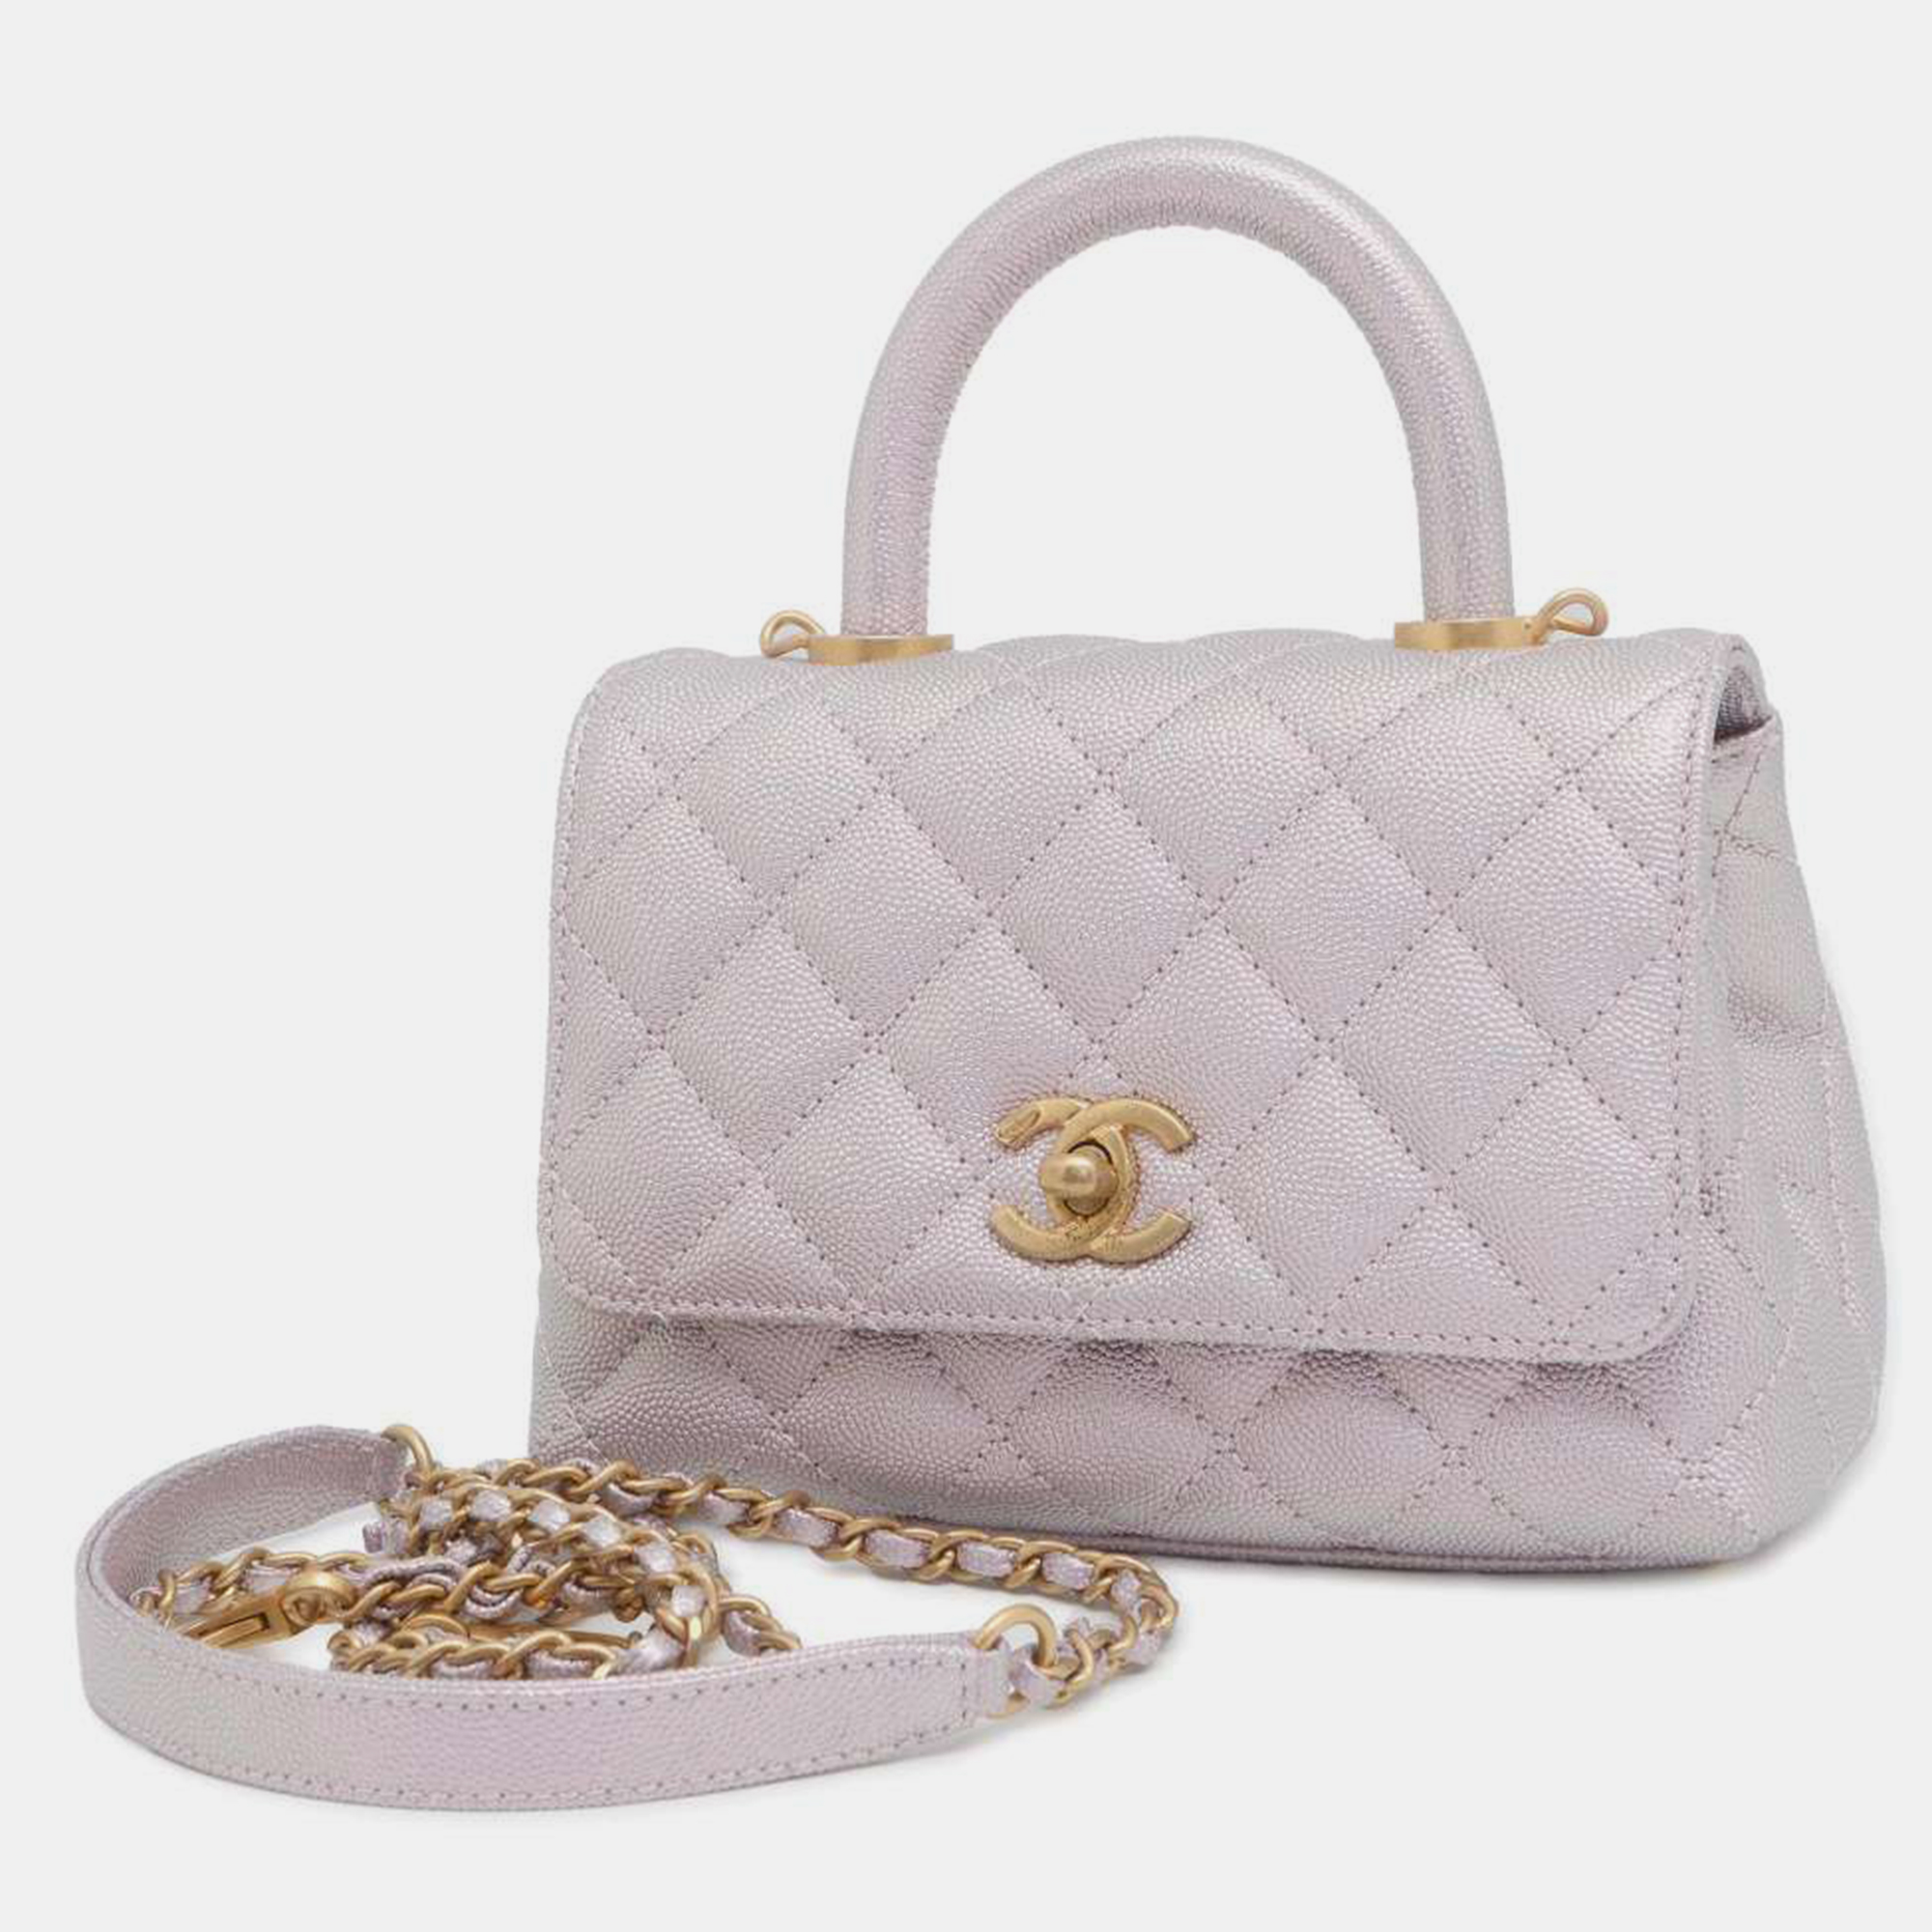 

Chanel White Caviar Leather Coco Top Handle Bag, Pink